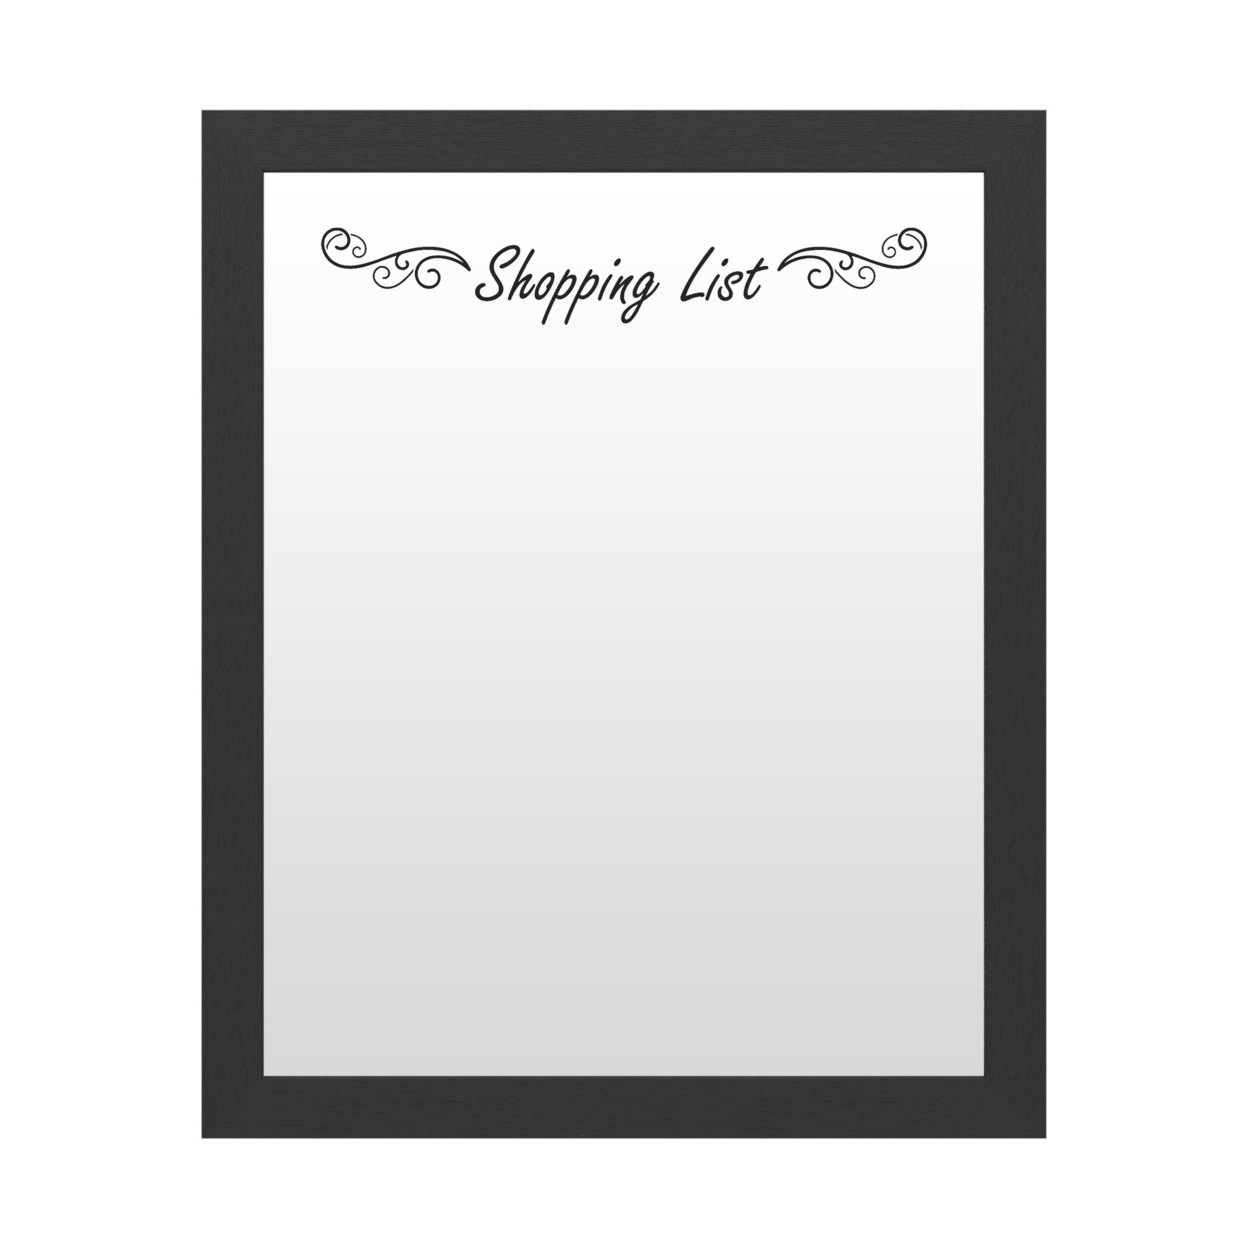 Dry Erase 16 X 20 Marker Board With Printed Artwork - Shopping List White Board - Ready To Hang